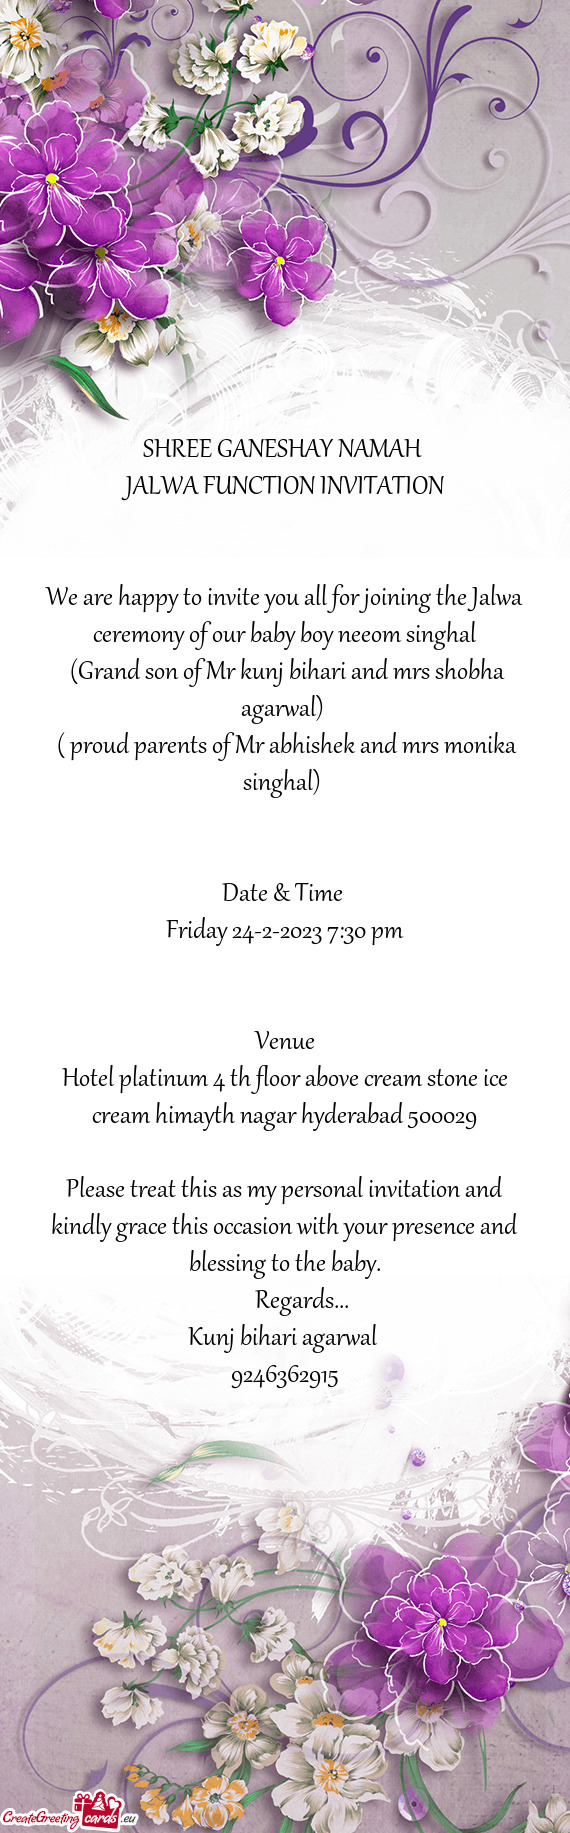 We are happy to invite you all for joining the Jalwa ceremony of our baby boy neeom singhal